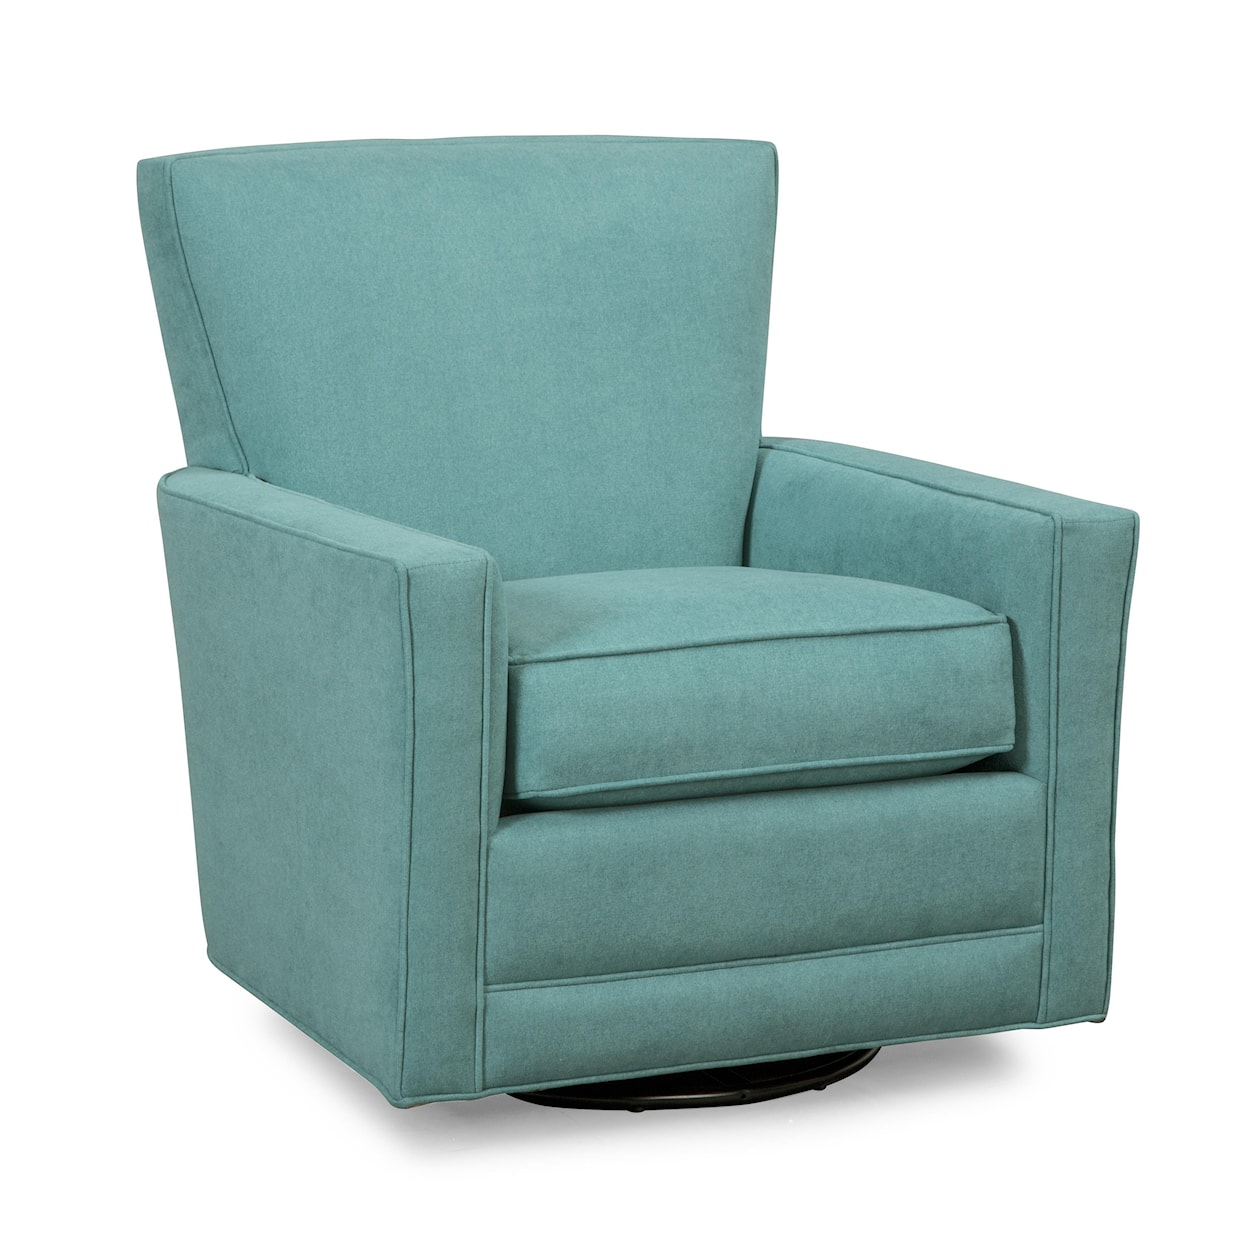 Hickory Craft Swivel Chairs Swivel Glider Chair